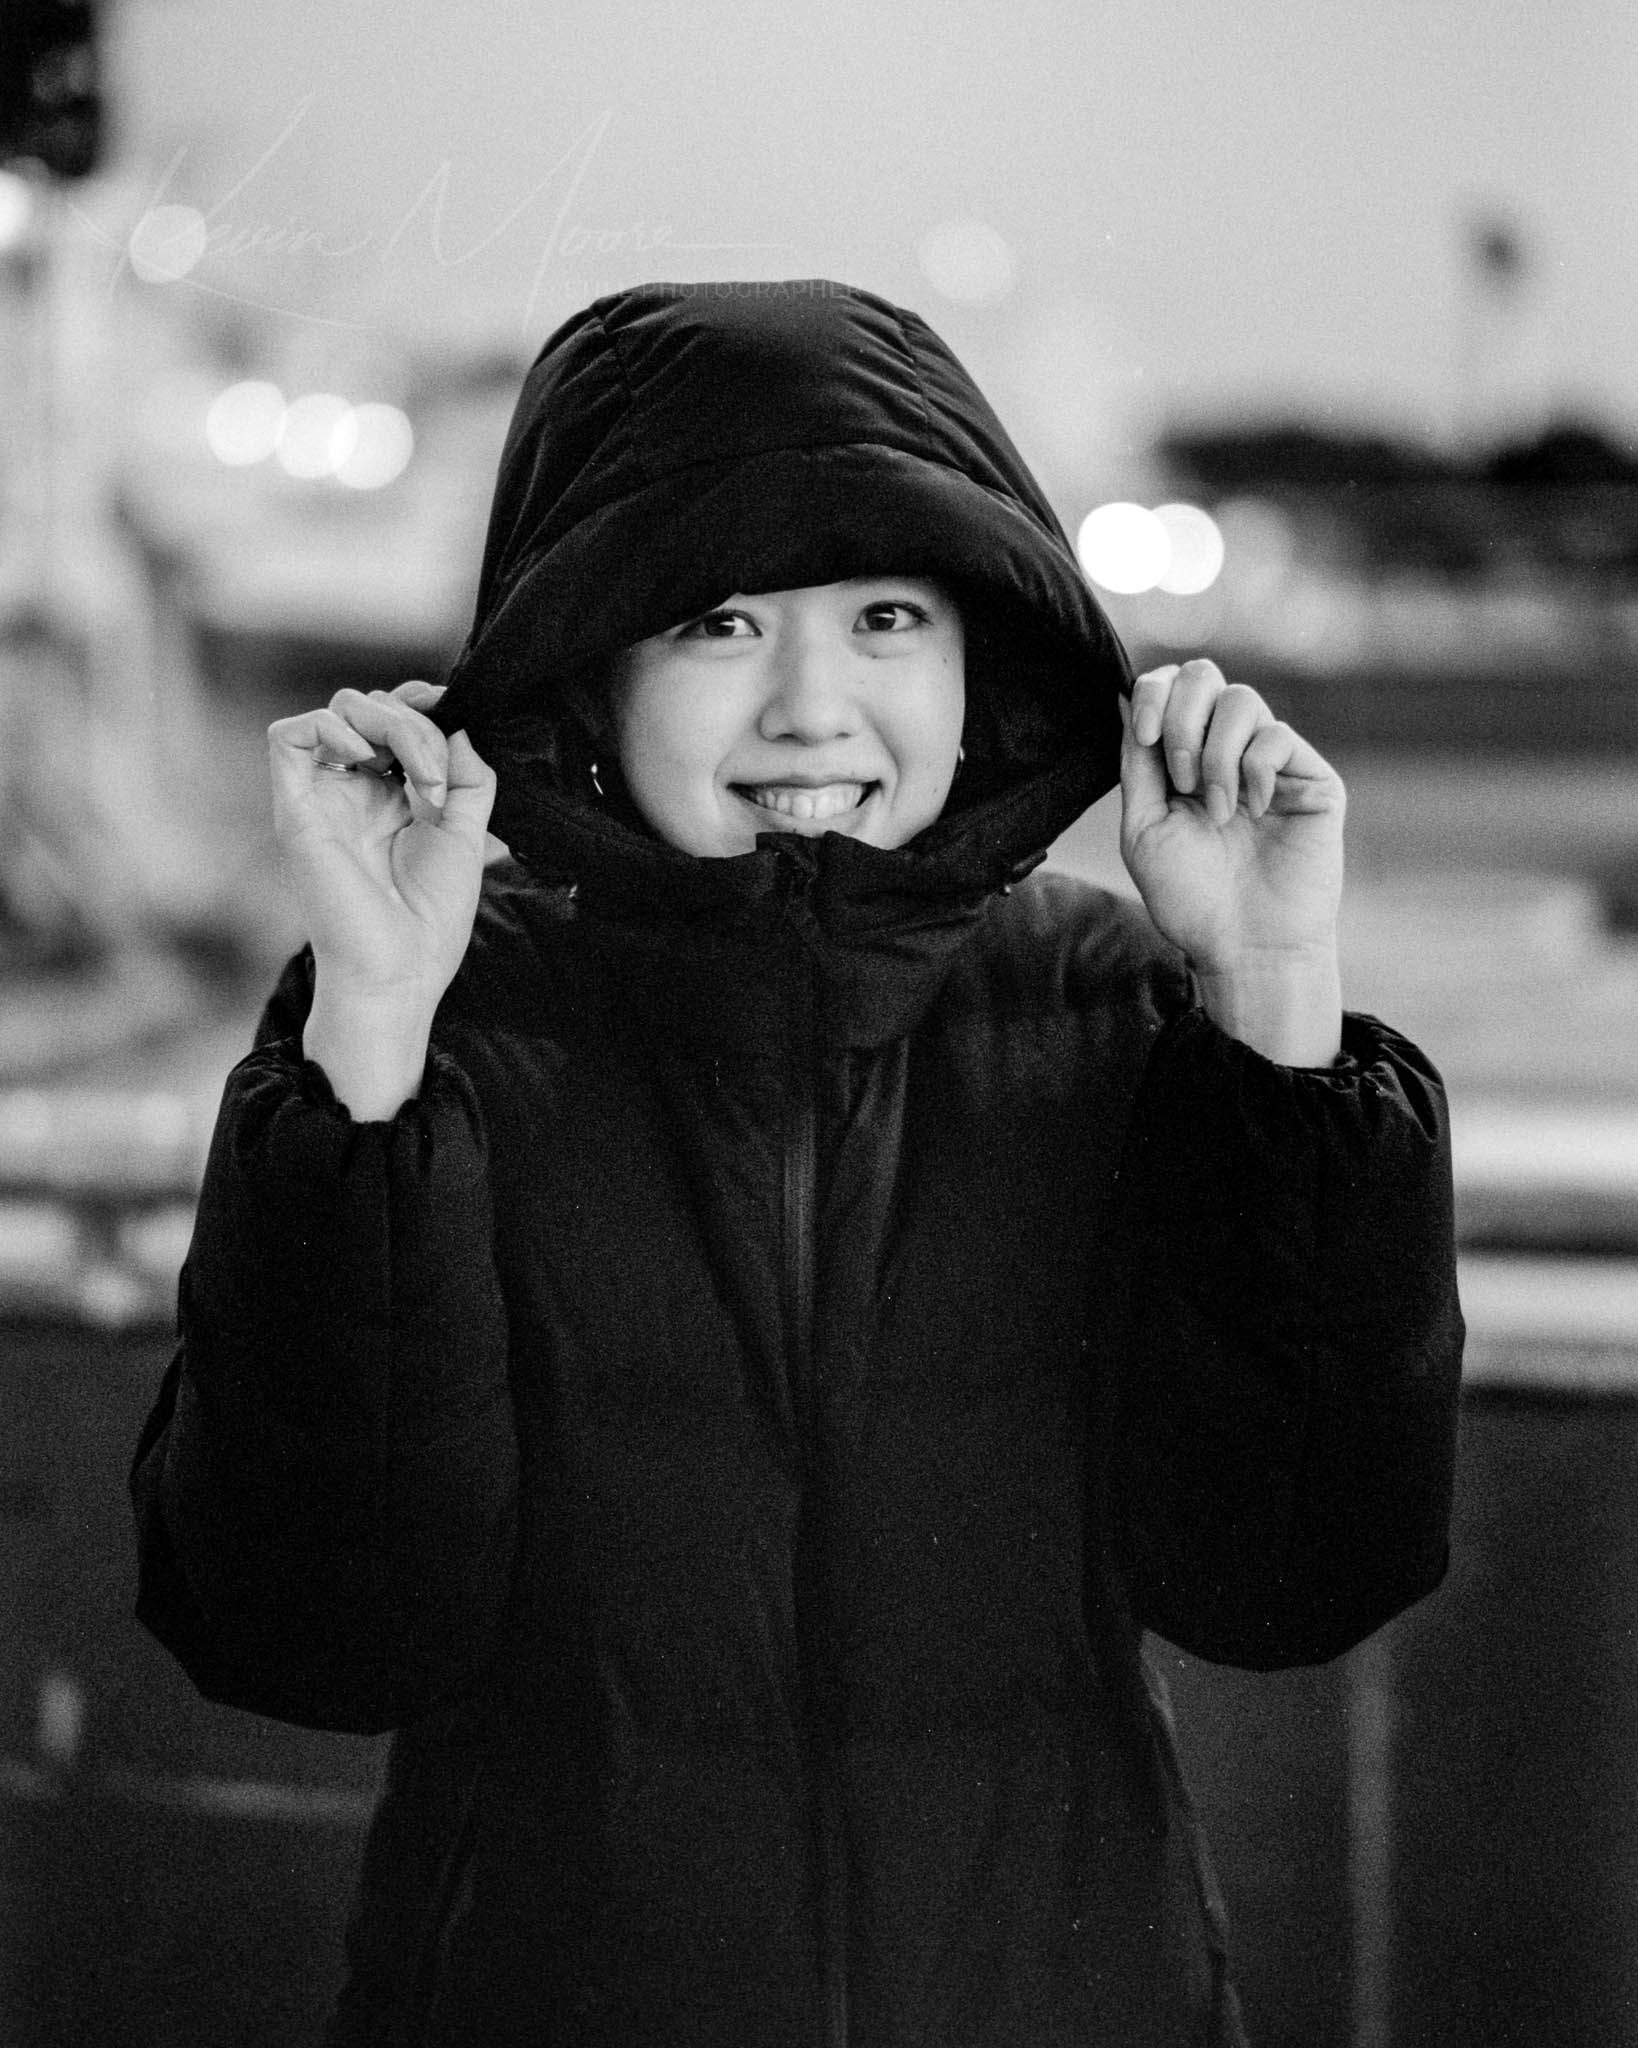 Woman with hooded jacket smiling joyfully in a night setting.